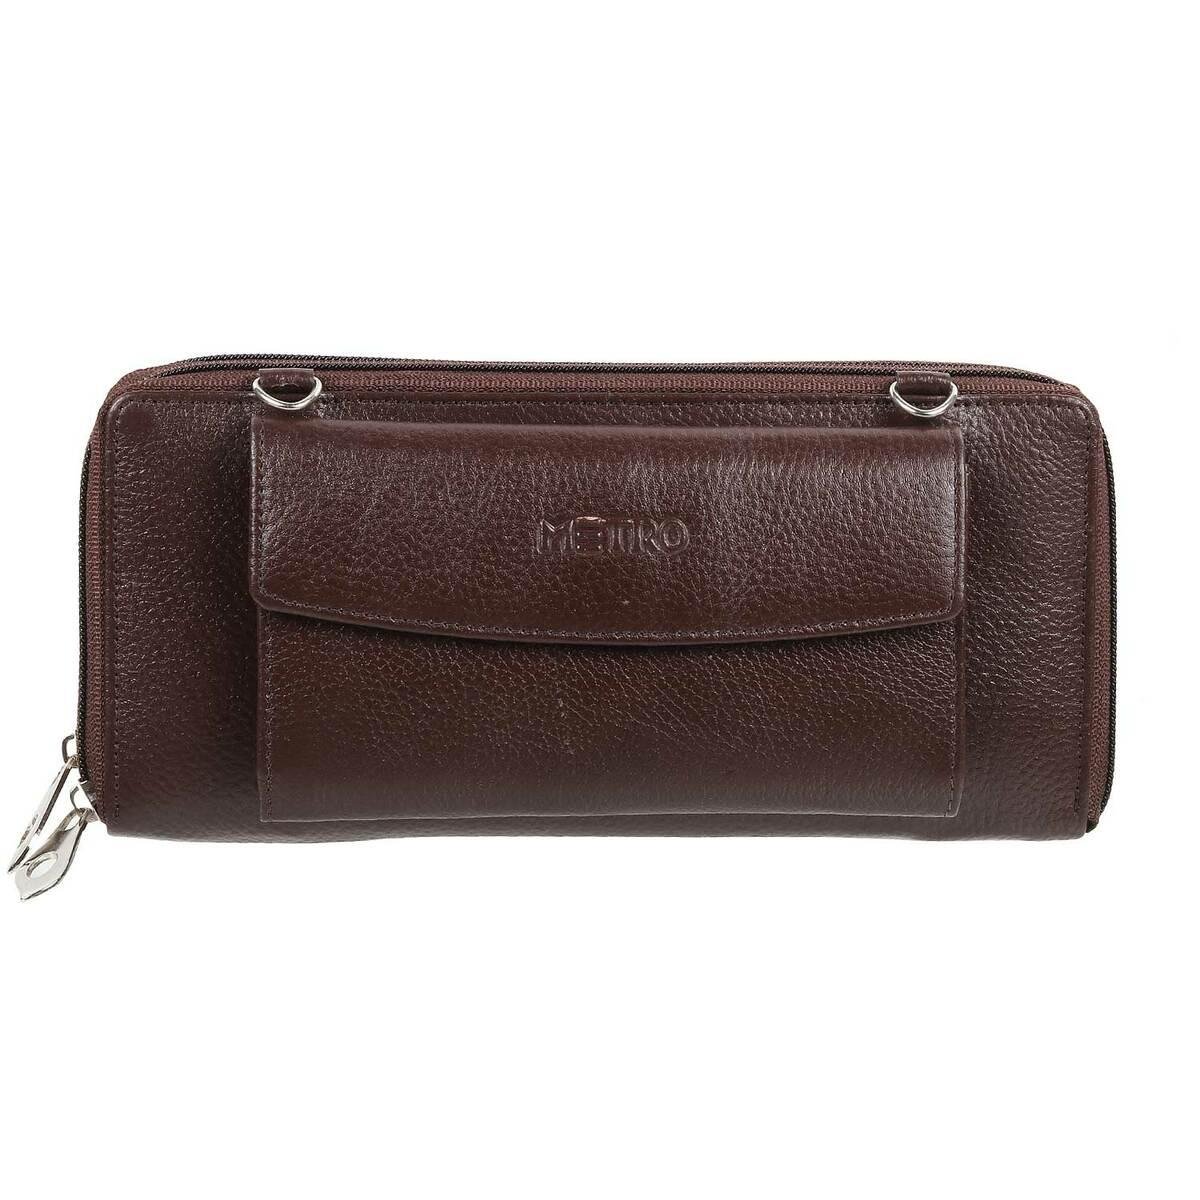 Buy Womens Handbags and Wallets Online - A-SHU.CO.UK – tagged 